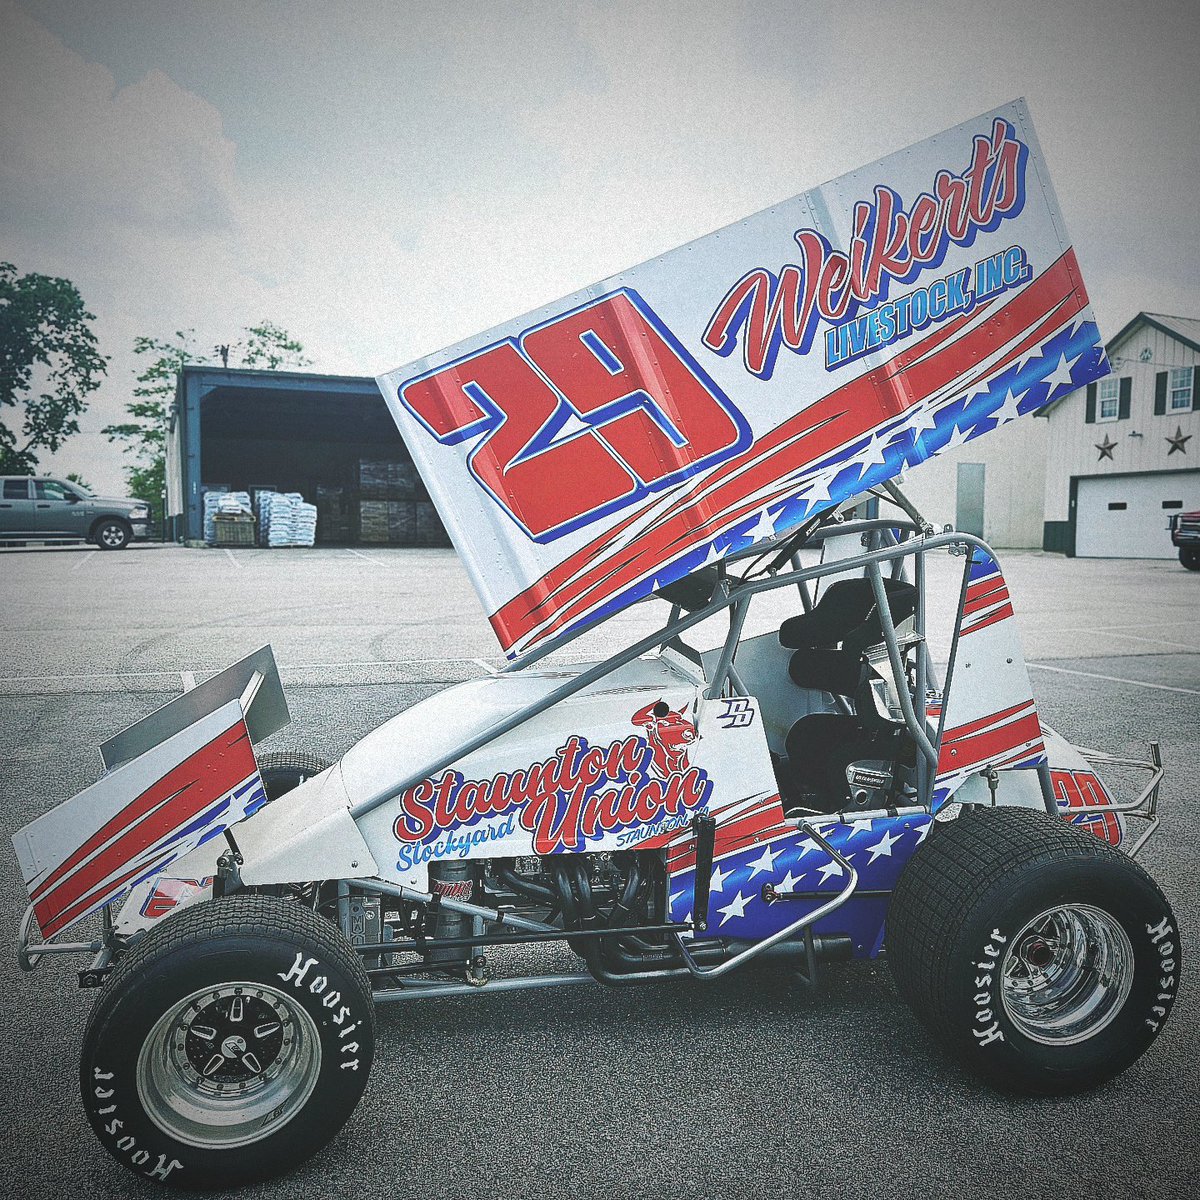 Our Weikert tribute car is done for the weekend! You'll see it Friday, Saturday, & Sunday this weekend! Also, shirts will be available at the track AND are online this year at dannydietrich.com/merch/. There are a LIMITED amount, and once they're gone, they're gone!